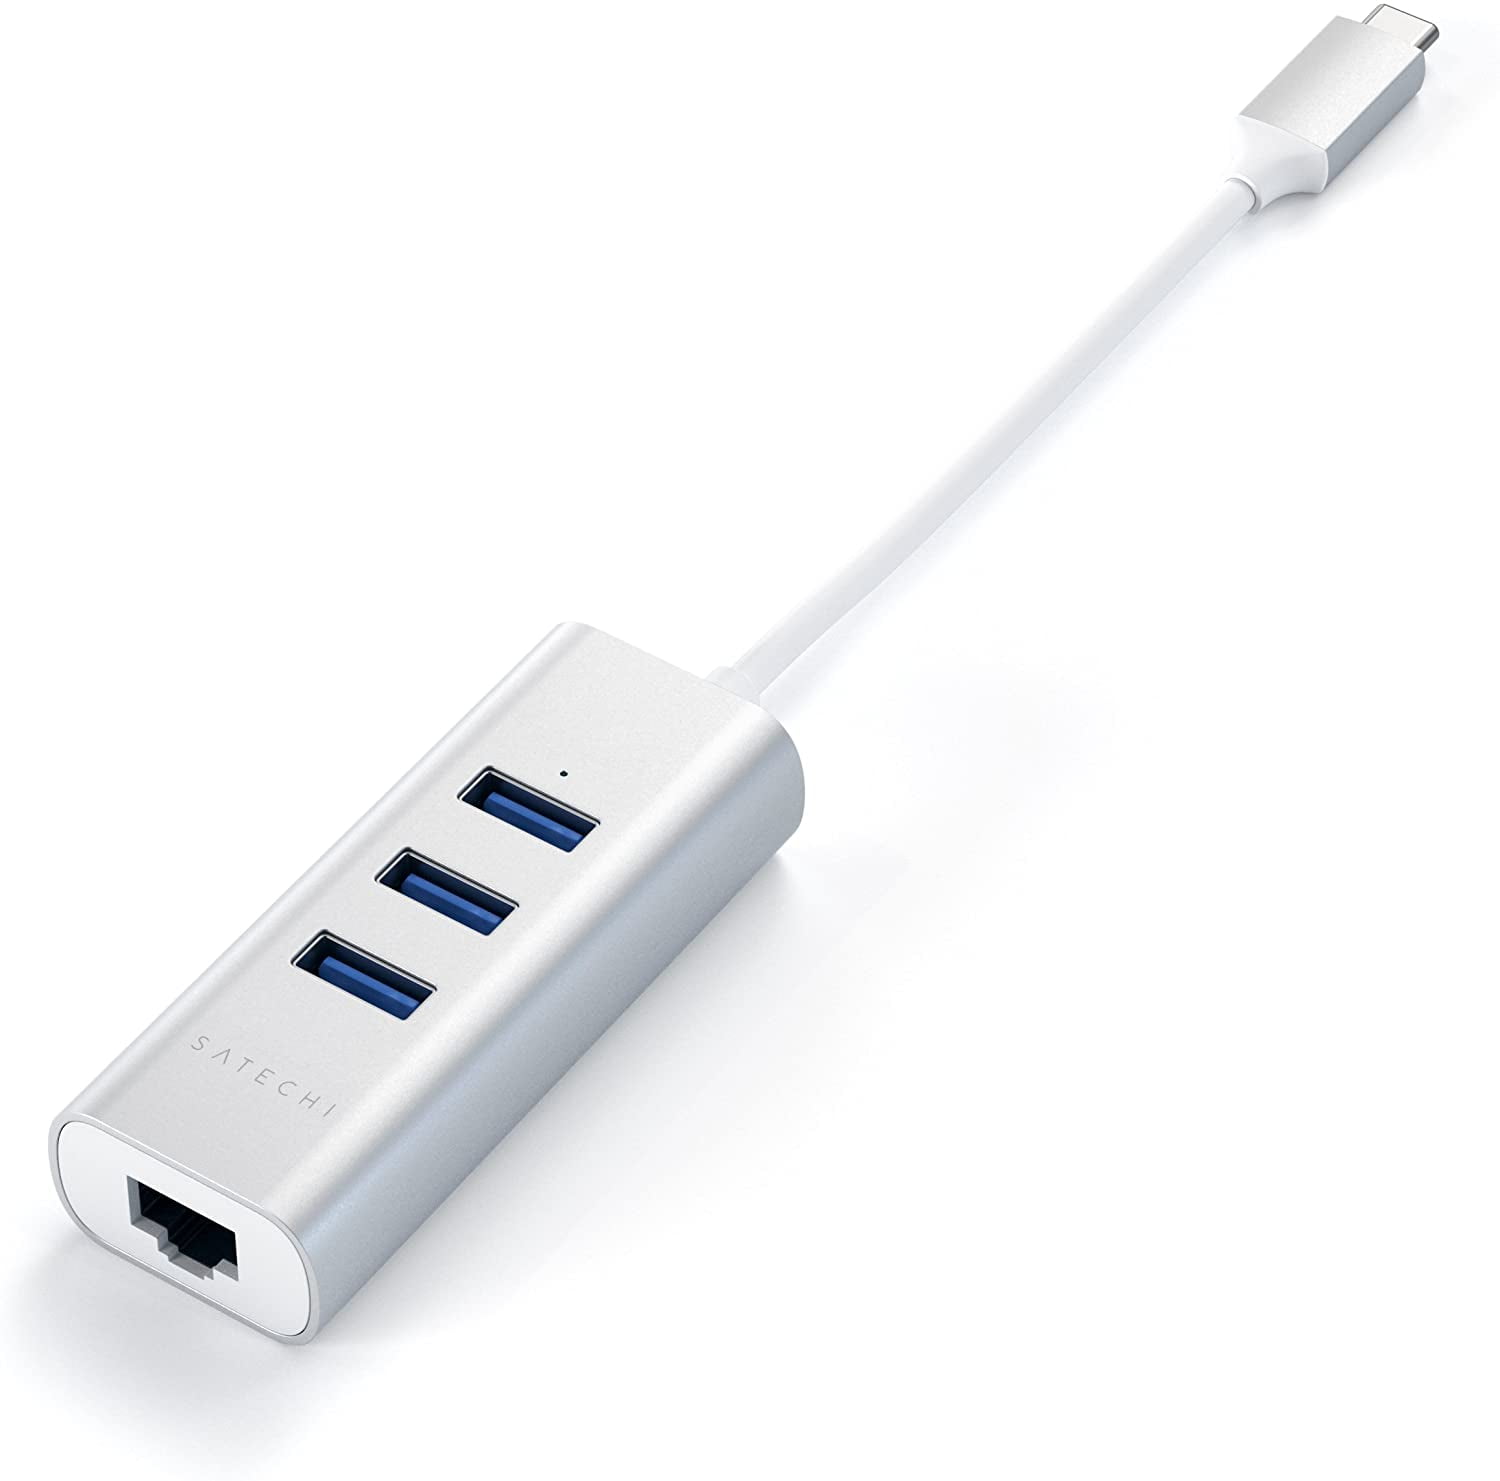 Compatible with 2020/2018 MacBook Air 2019/2018/2017 MacBook Pro 2020/2018 iPad Pro Silver Satechi Type-C 2-in-1 USB 3.0 Aluminum 3 Port Hub with Ethernet 